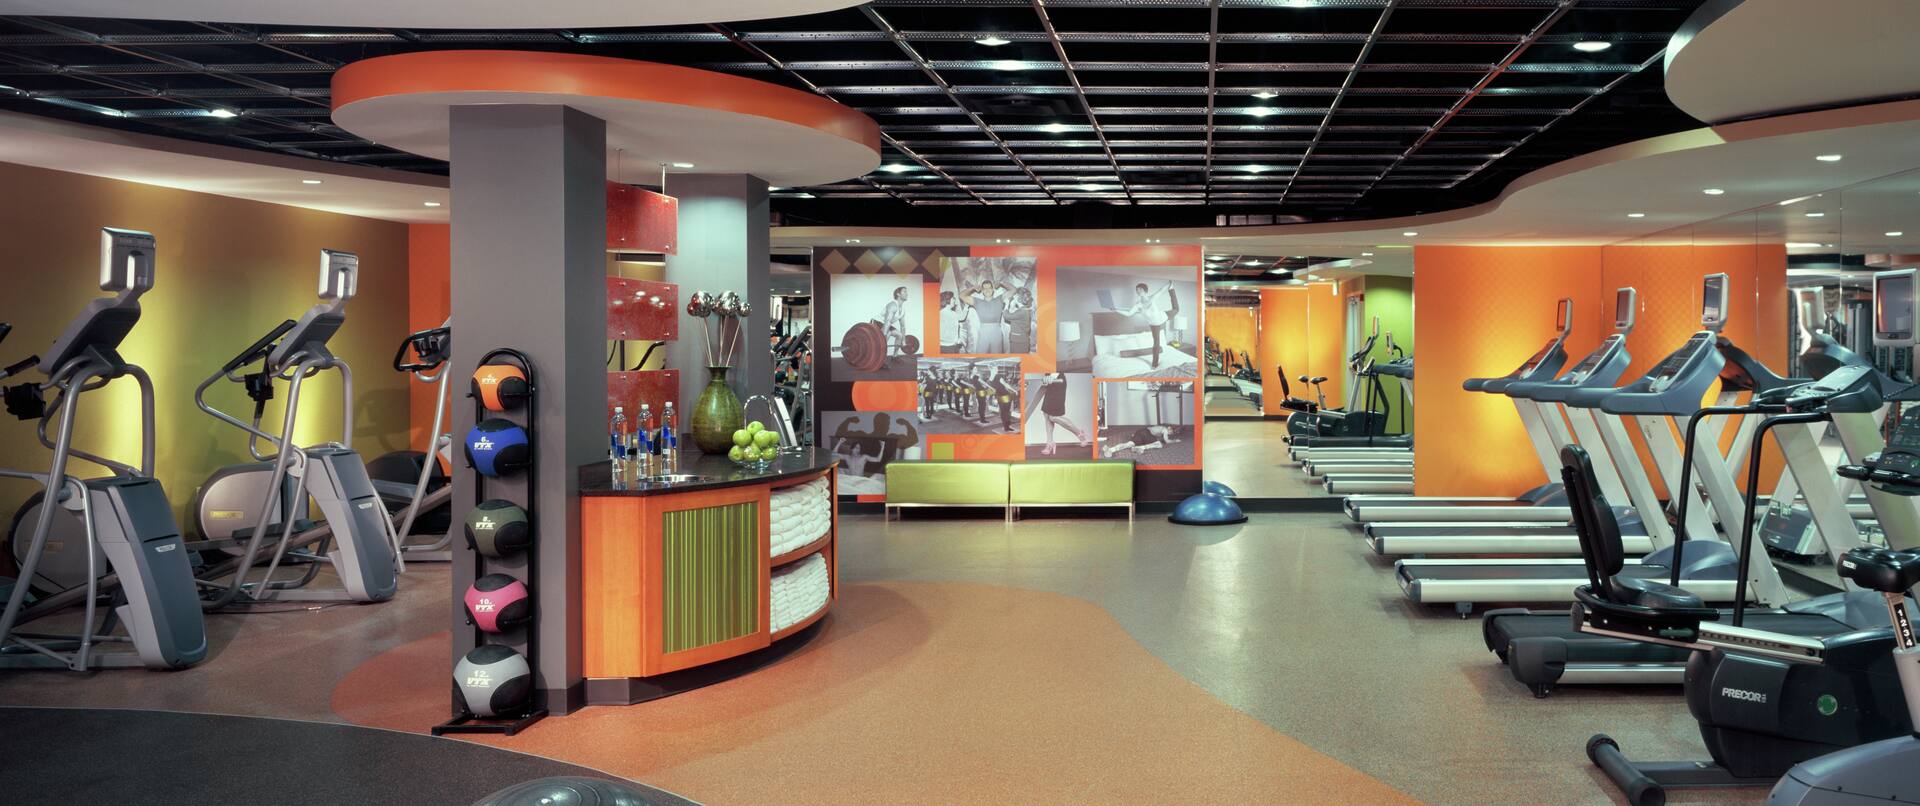 a fitness center with exercise machines and a counter with water and towels